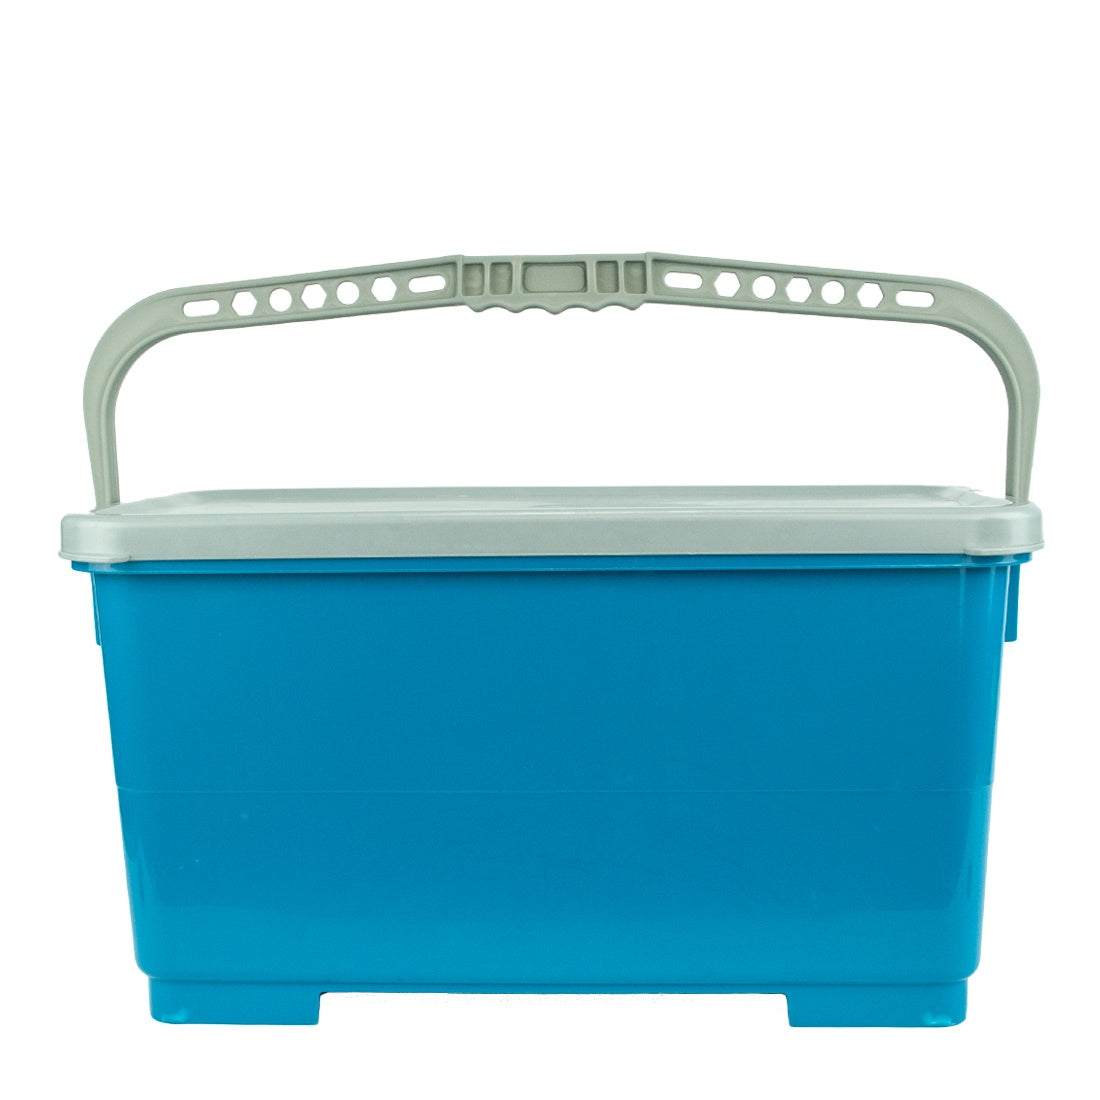 Moerman Bucket - 6 Gallon - Handle Up - Front View with Lid